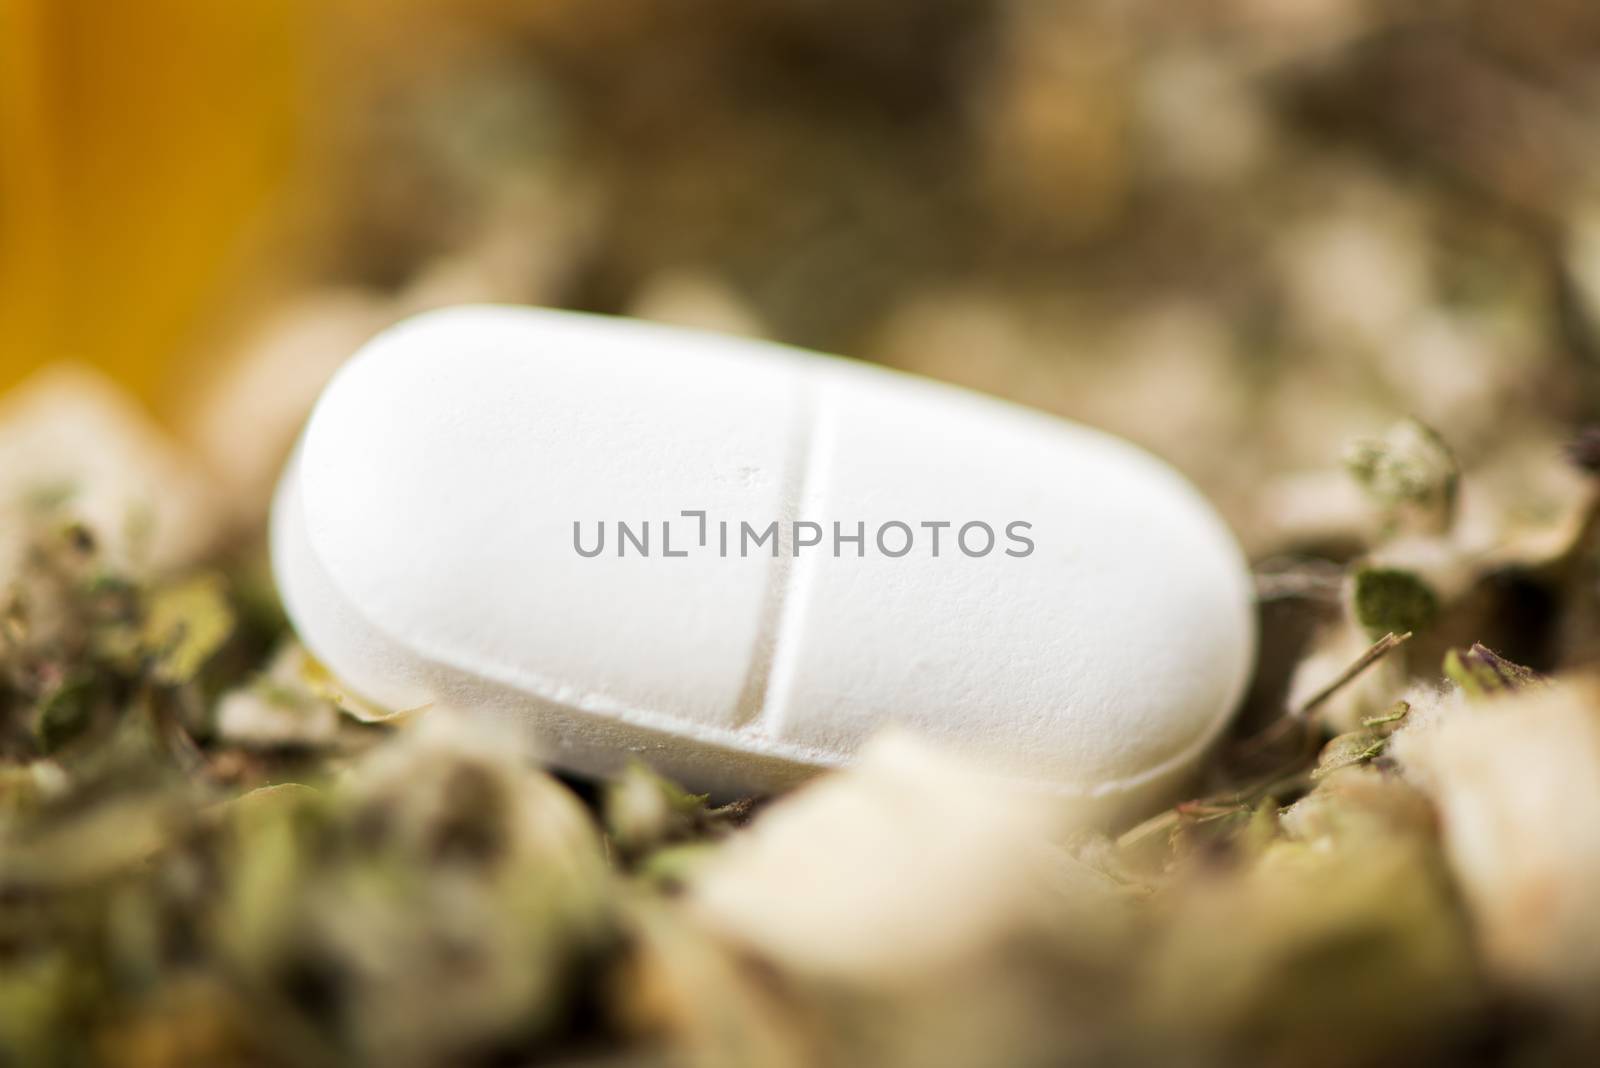 White Pill on herbal background. The focus is on the pill.